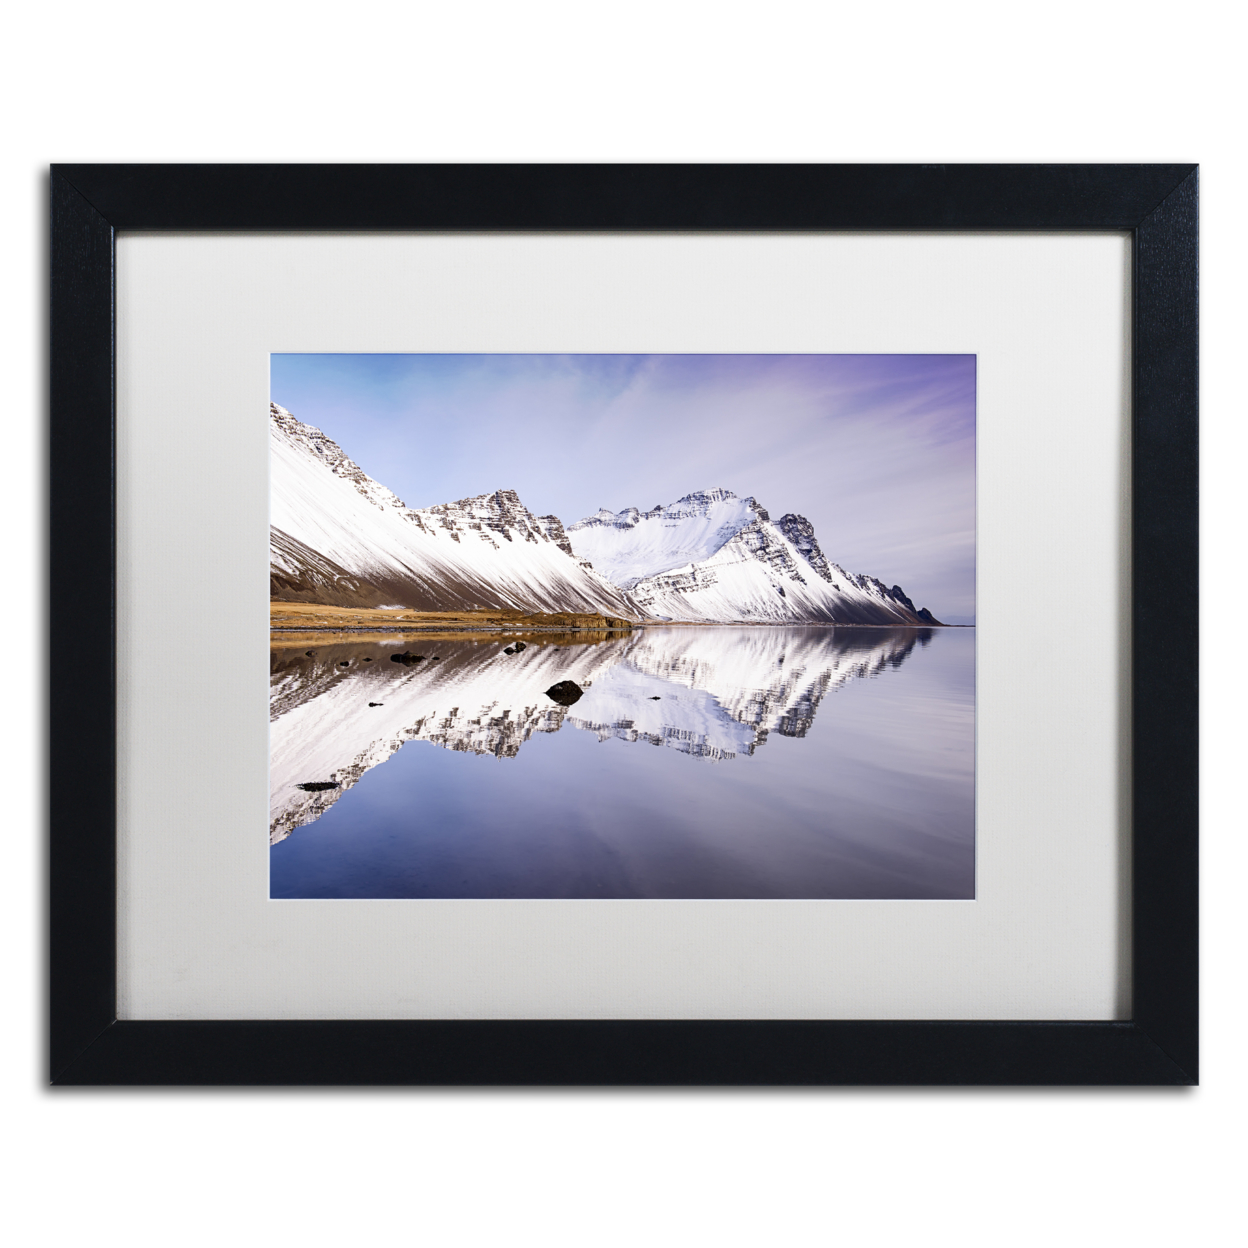 Michael Blanchette Photography 'Mountain Propulsion' Black Wooden Framed Art 18 X 22 Inches